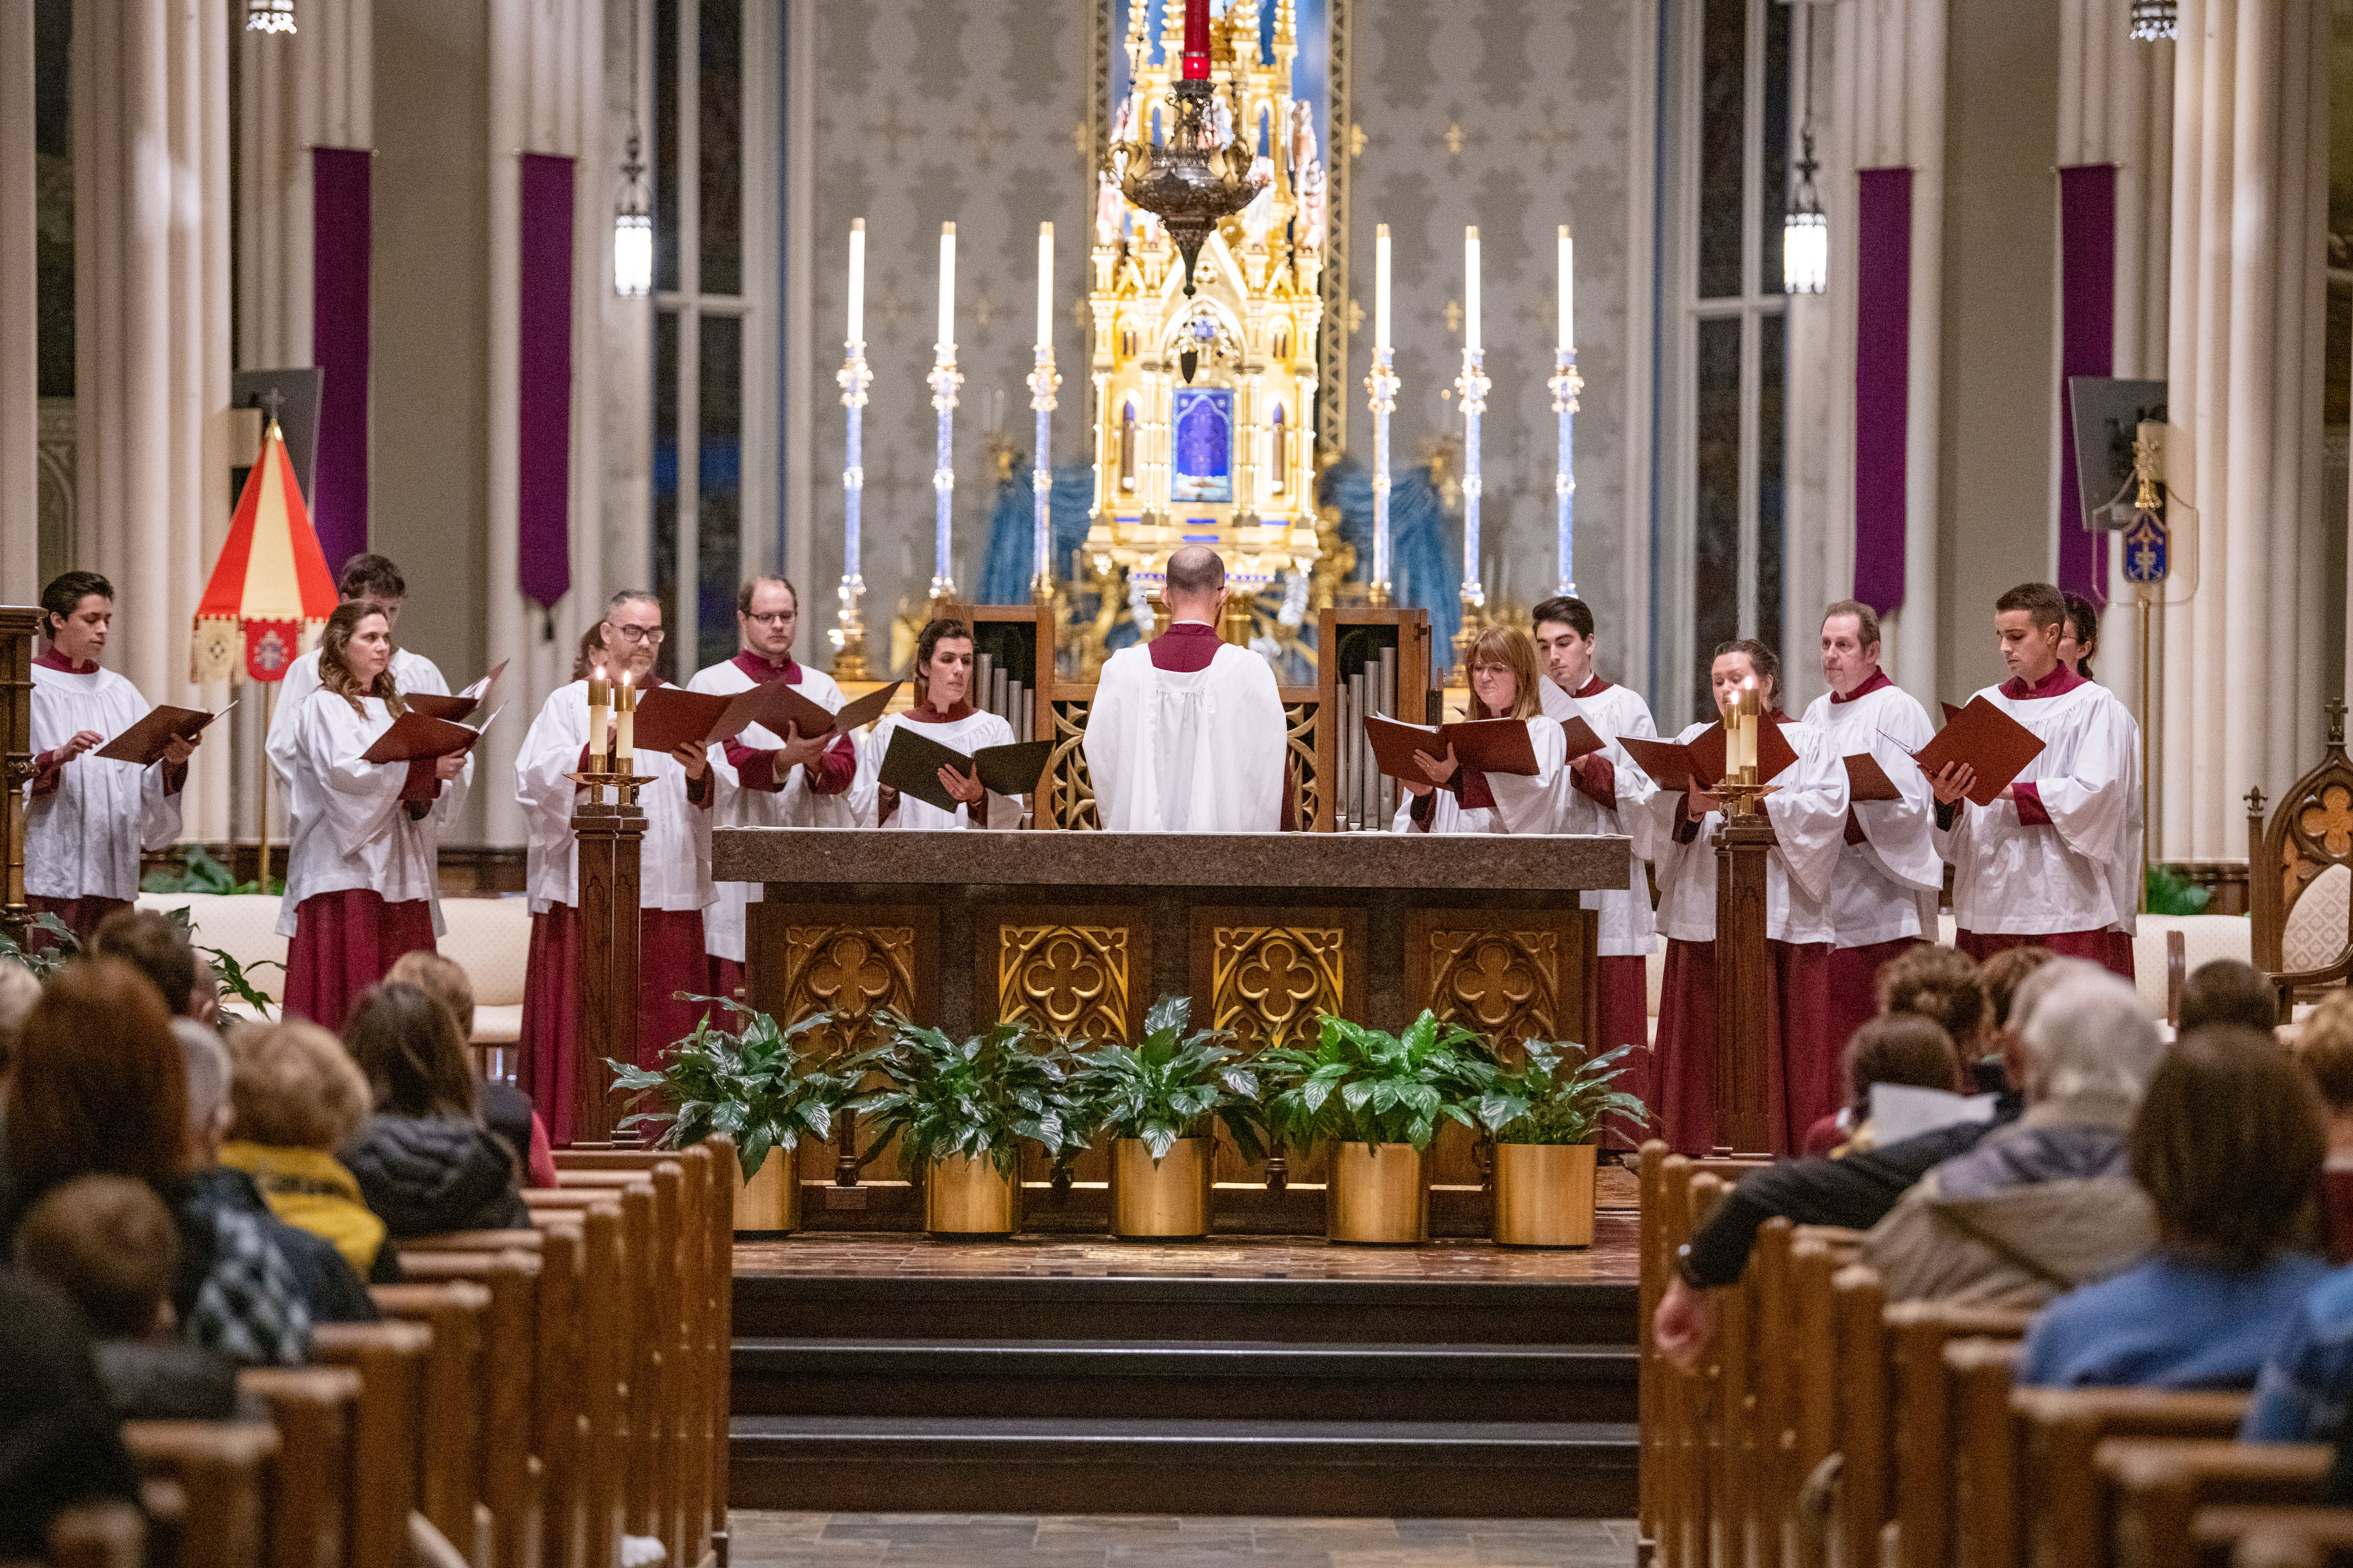 Advent Lessons & Carols from the Basilica of the Sacred Heart